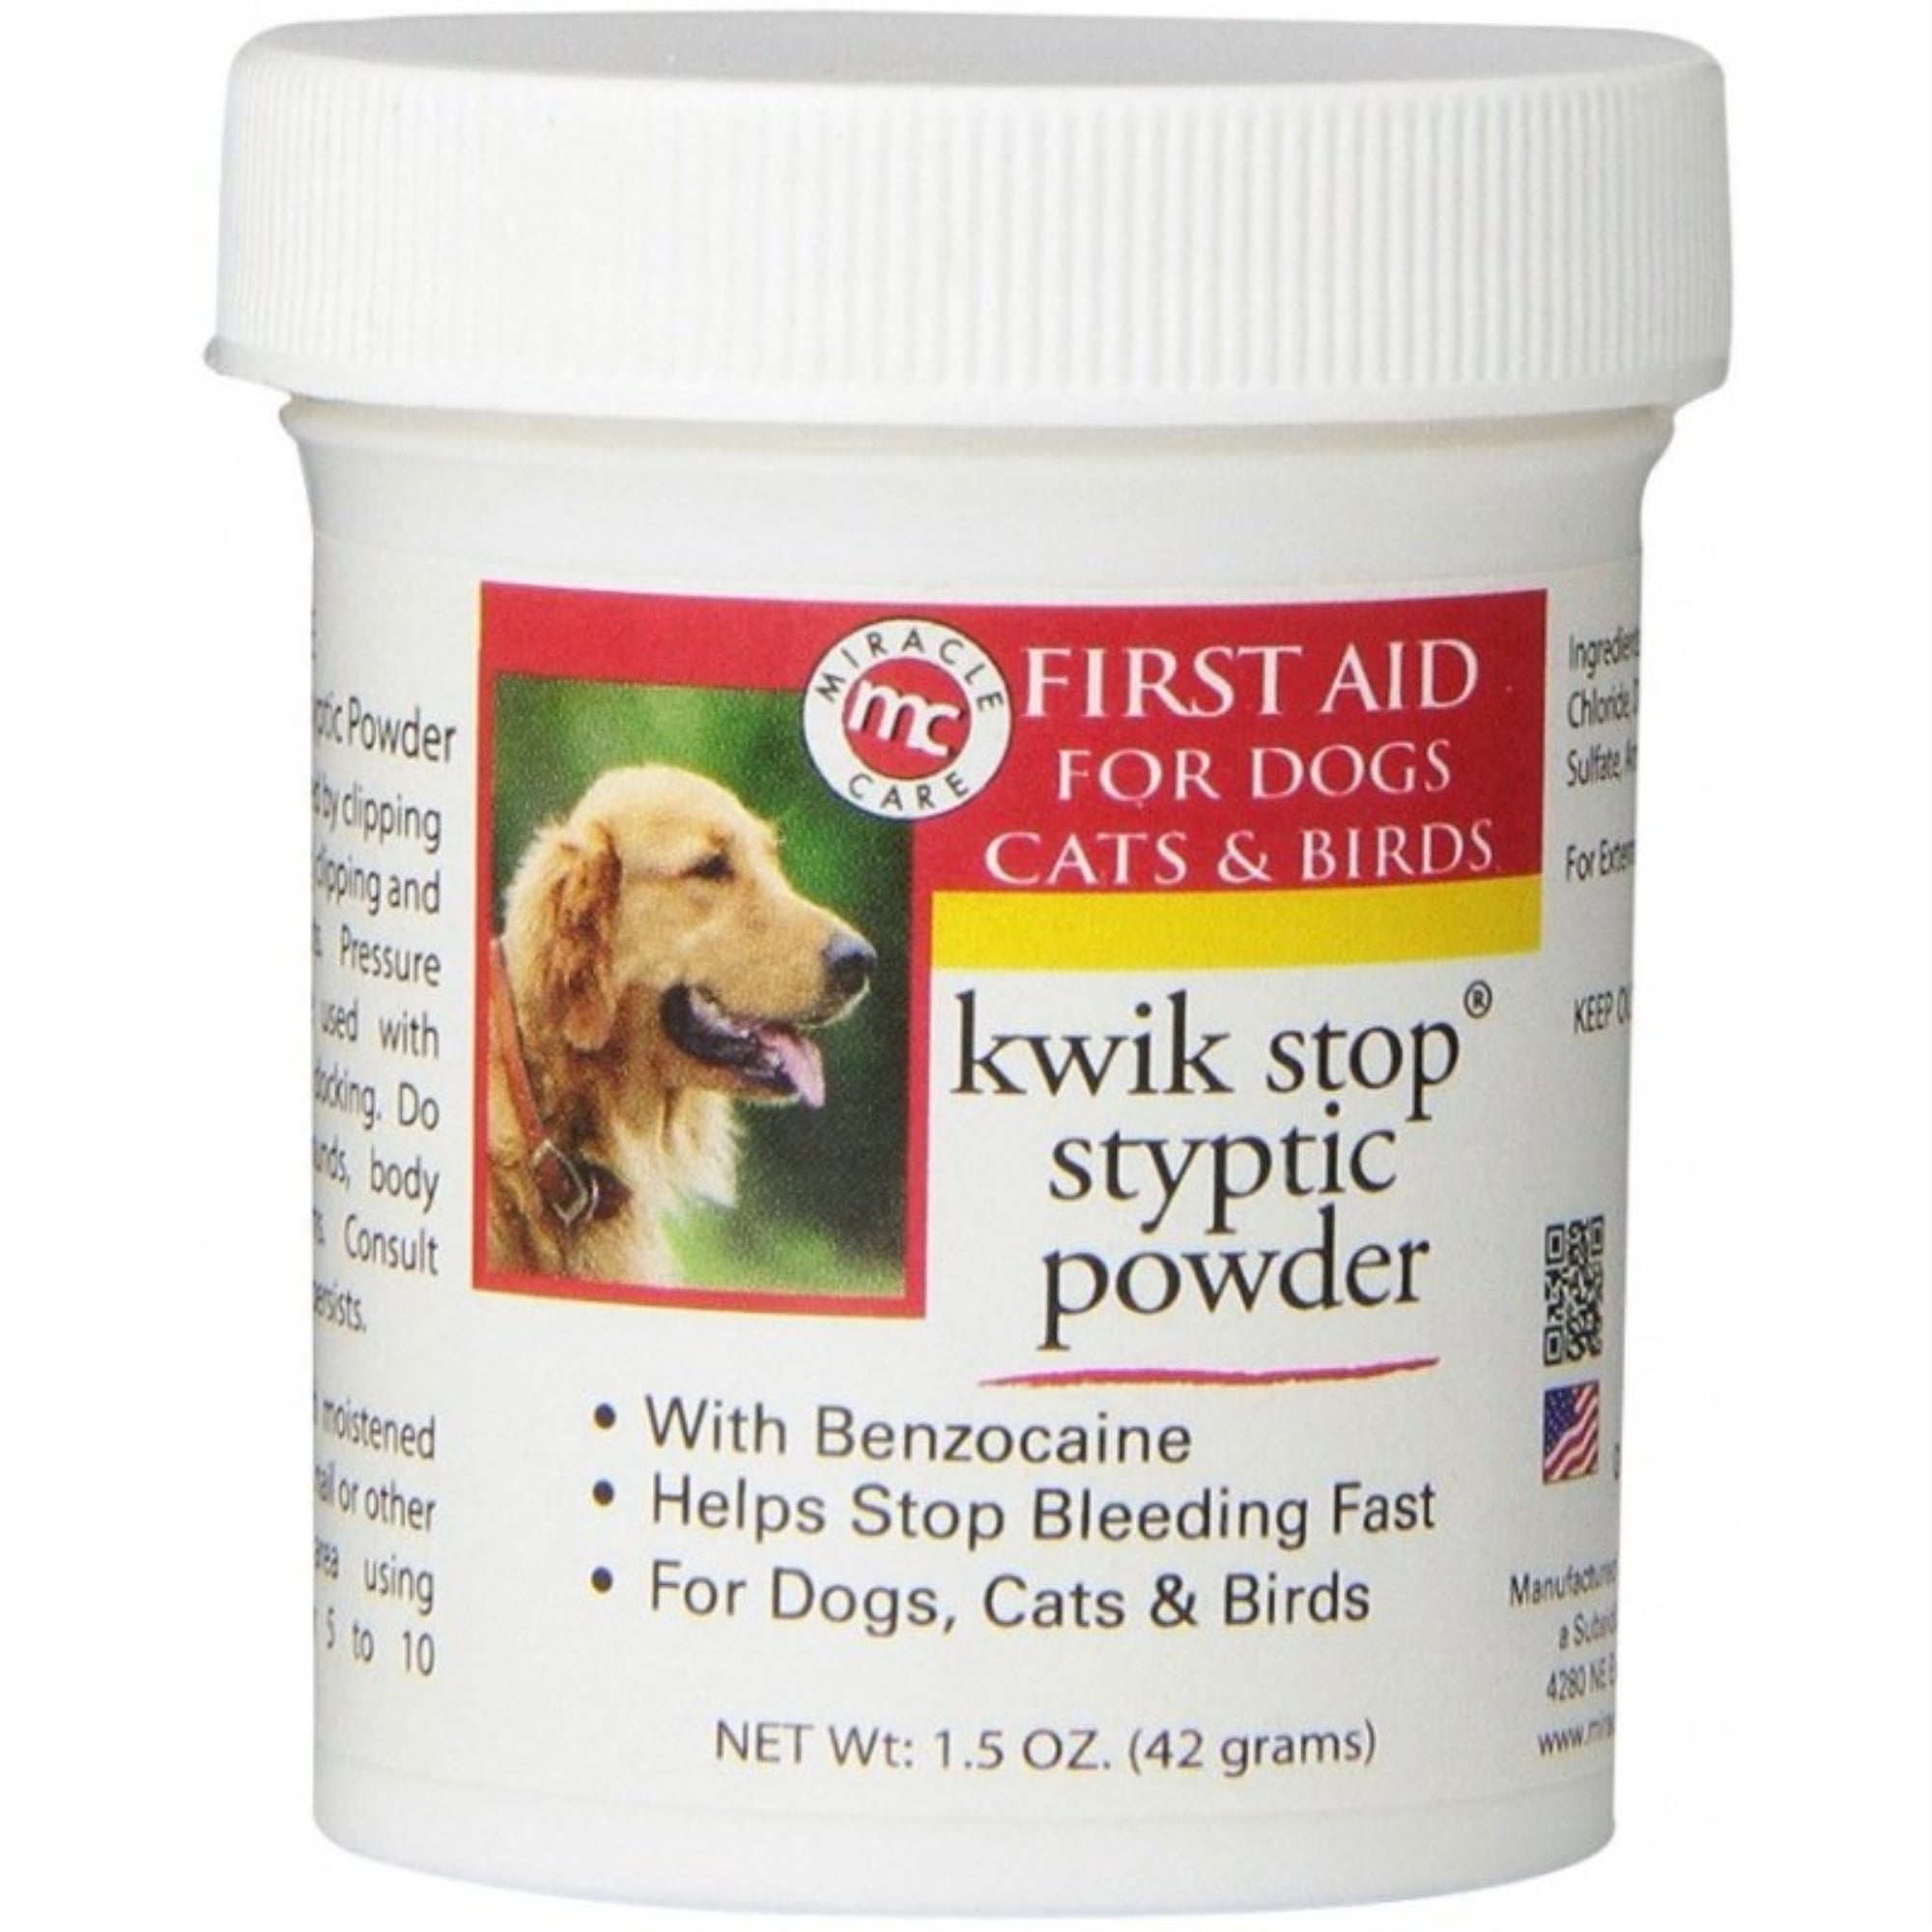 Kwik-Stop Styptic Powder for Poultry, 14 g - My Favorite Chicken